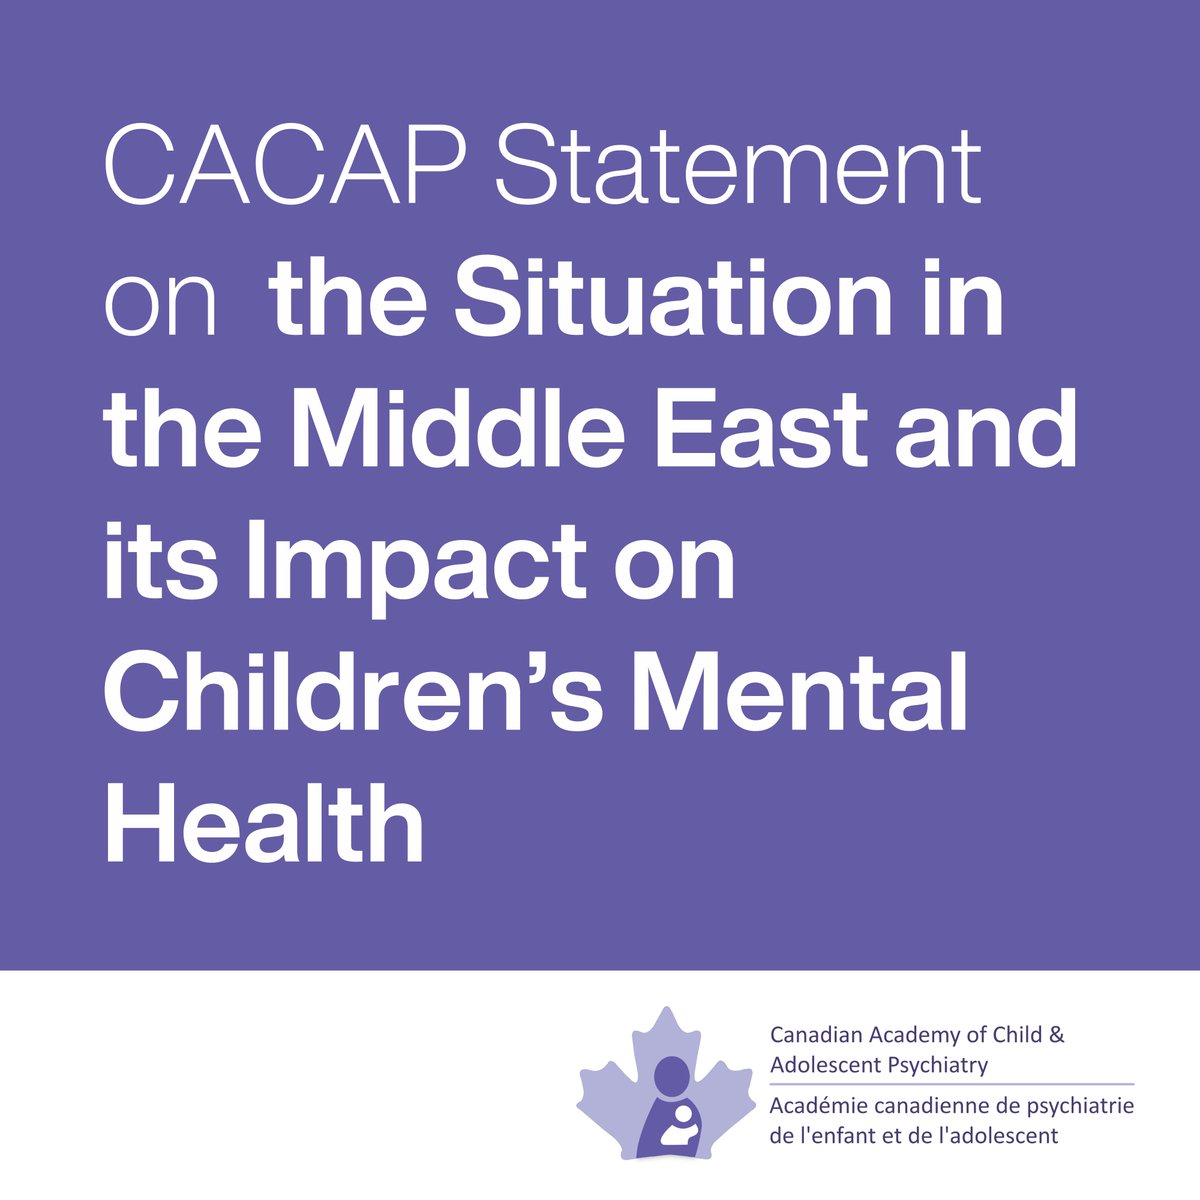 2 weeks ago, CACAP issued a statement on the situation in the Middle East & its impact on children's #mentalhealth. We call upon our colleagues & global leaders to advocate for a ceasefire & return of hostages now: cacap-acpea.org/explore/advoca… #advocacy